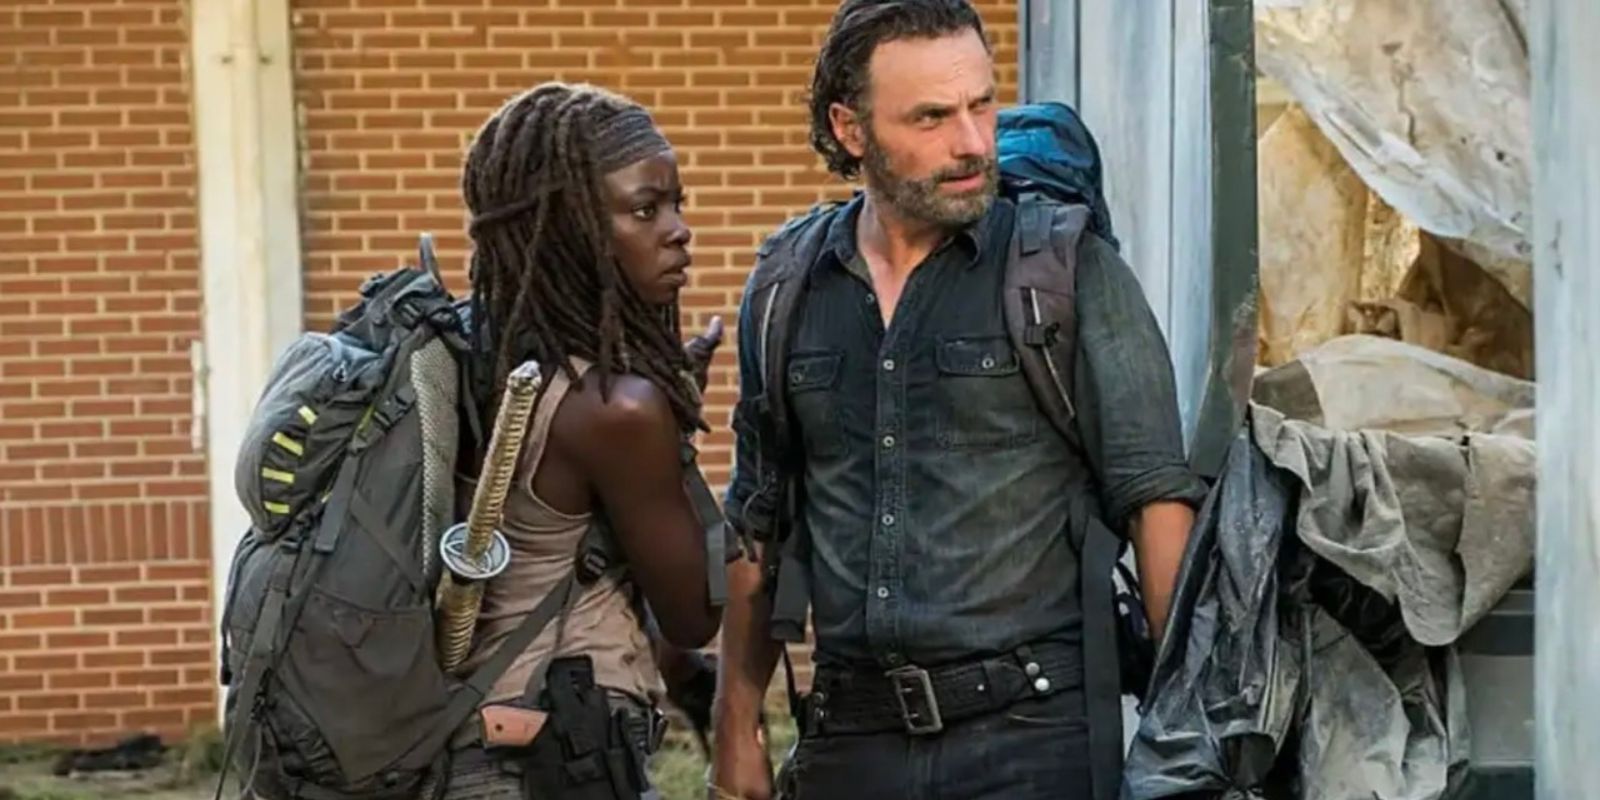 Rick and Michonne turn their heads to look out